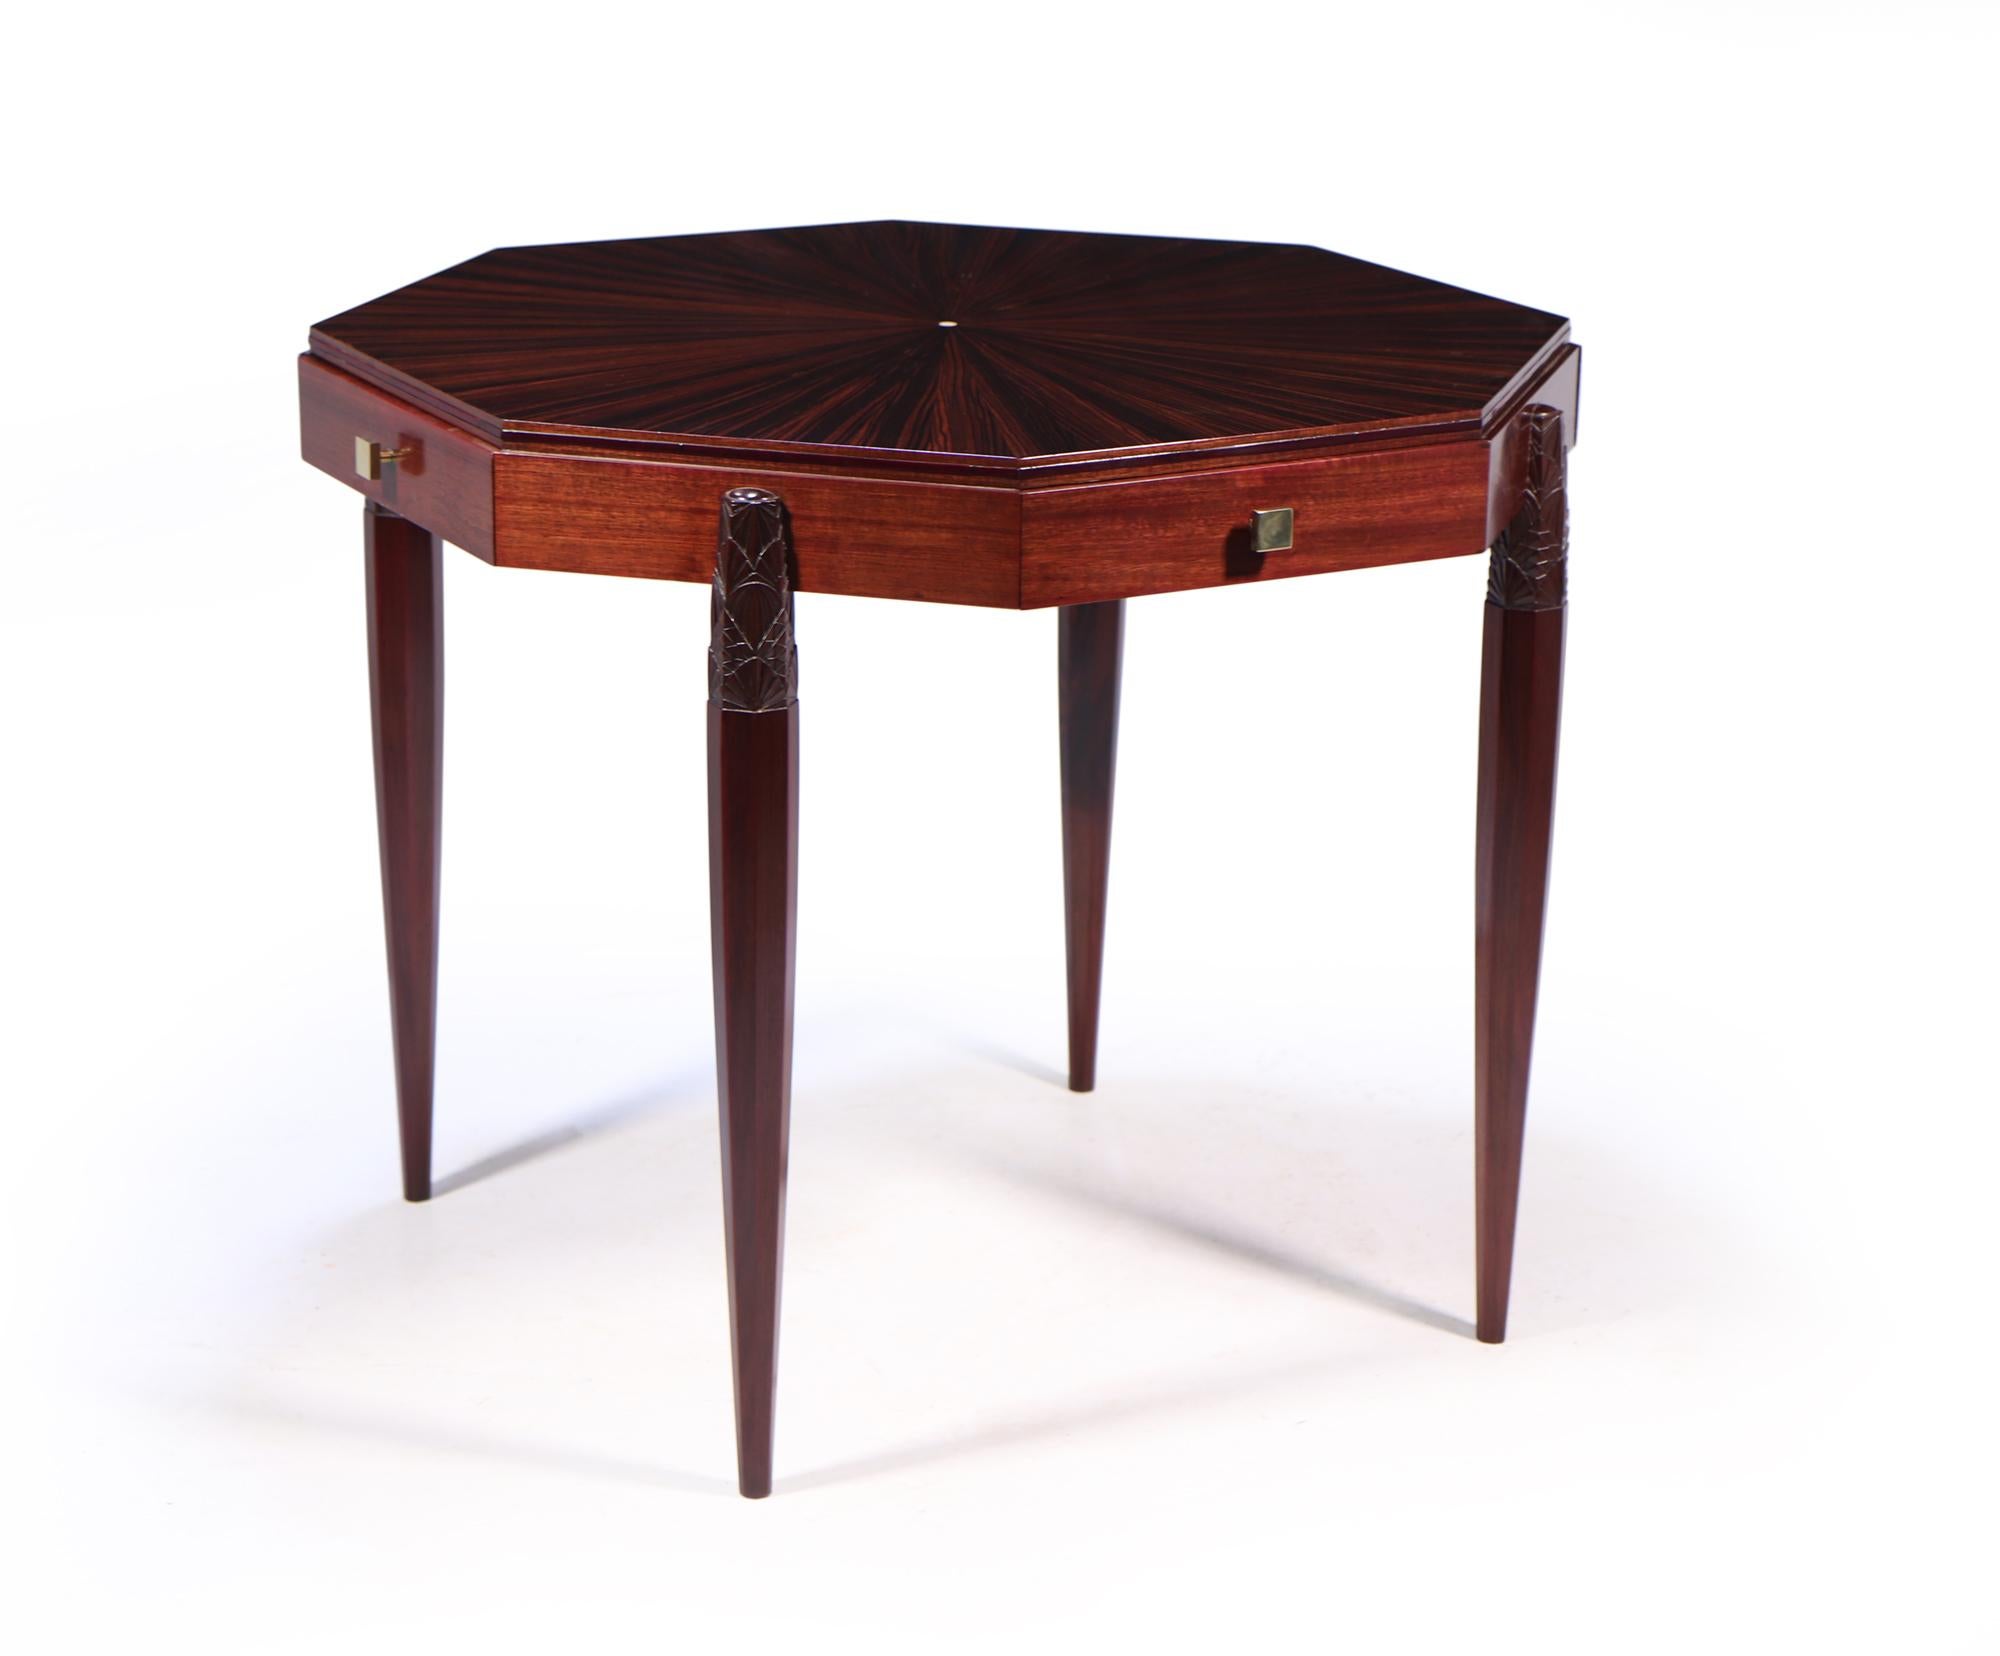 An octagonal shaped games table with four drawers with brass square handles and octagonal shaped legs with crisply carved art deco pattern to the top of the leg. The table is a solid mahogany frame with a segmented macassar ebony top and a mother of